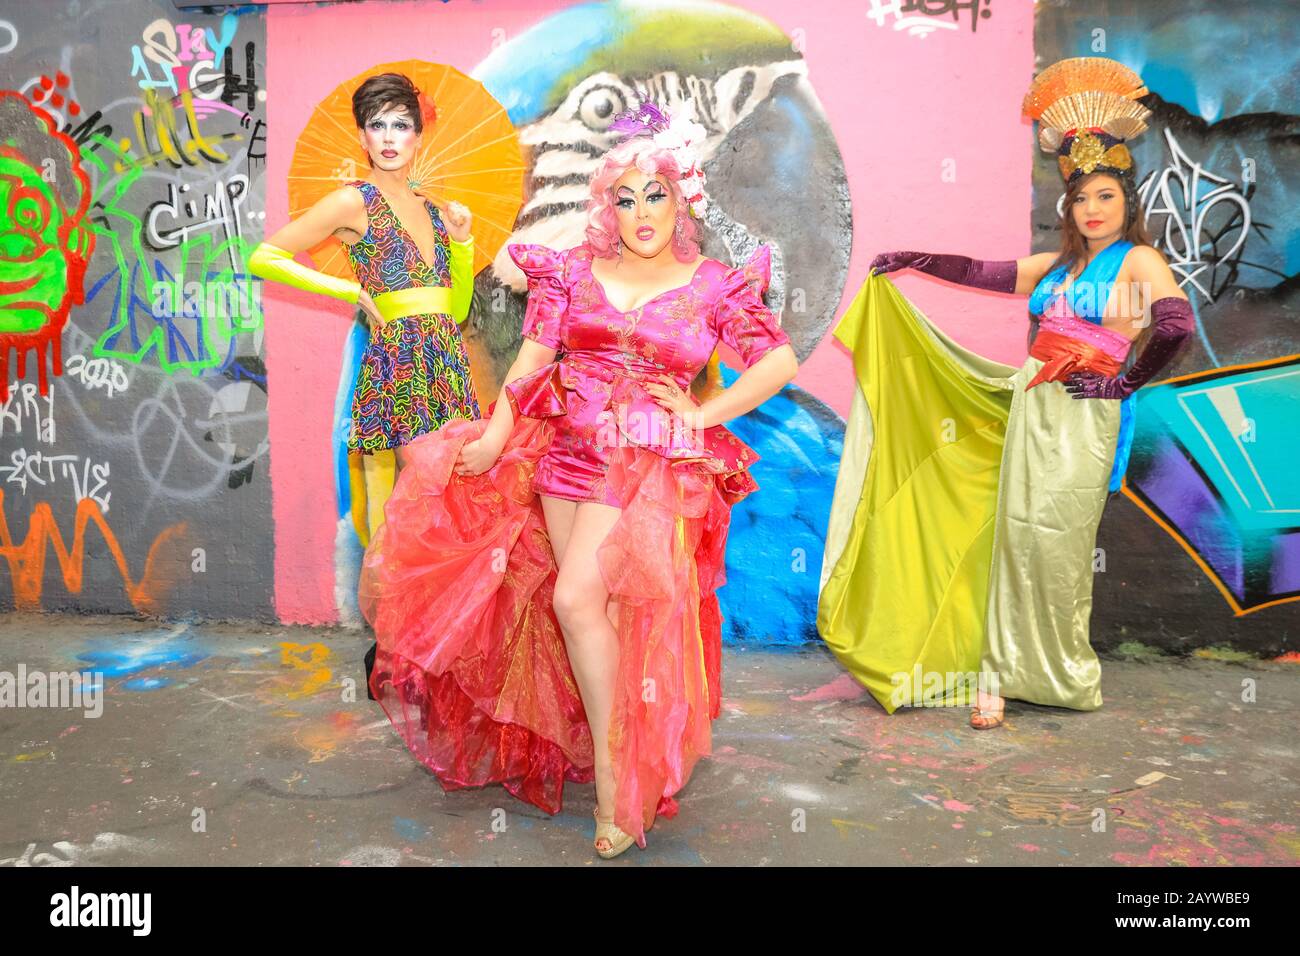 Waterloo, London, 17th Feb 2020. Drag collective Bitten Peach (ShayShay with umbrella, Lilly Snatchdragon in pink dress and wig, and Evelyn Carnate, in blue top) go underground in the graffiti-clad tunnels in Waterloo to celebrate London's VAULT Festival. The festival has returned for its eighth year with eight weeks of the best new theatre and comedy, immersive experiences, cabaret, live performance and late-night parties. VAULT Festival runs until March 22nd. Credit: Imageplotter/Alamy Live News Stock Photo